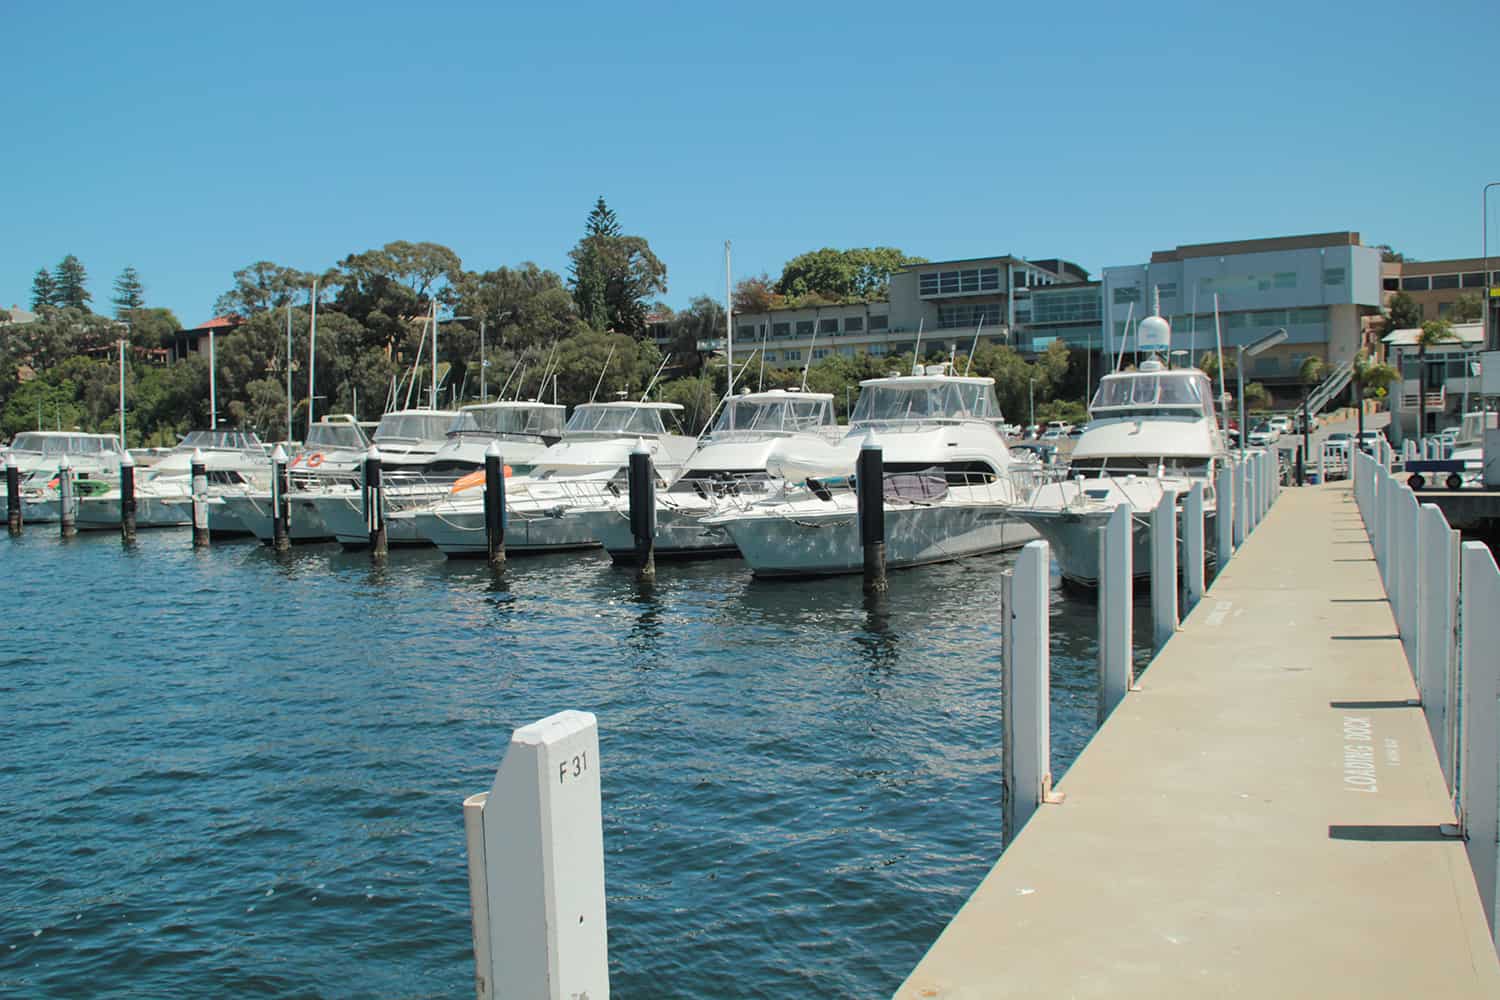 View from the jetty of powerboat yachts at Claremont Yacht Club